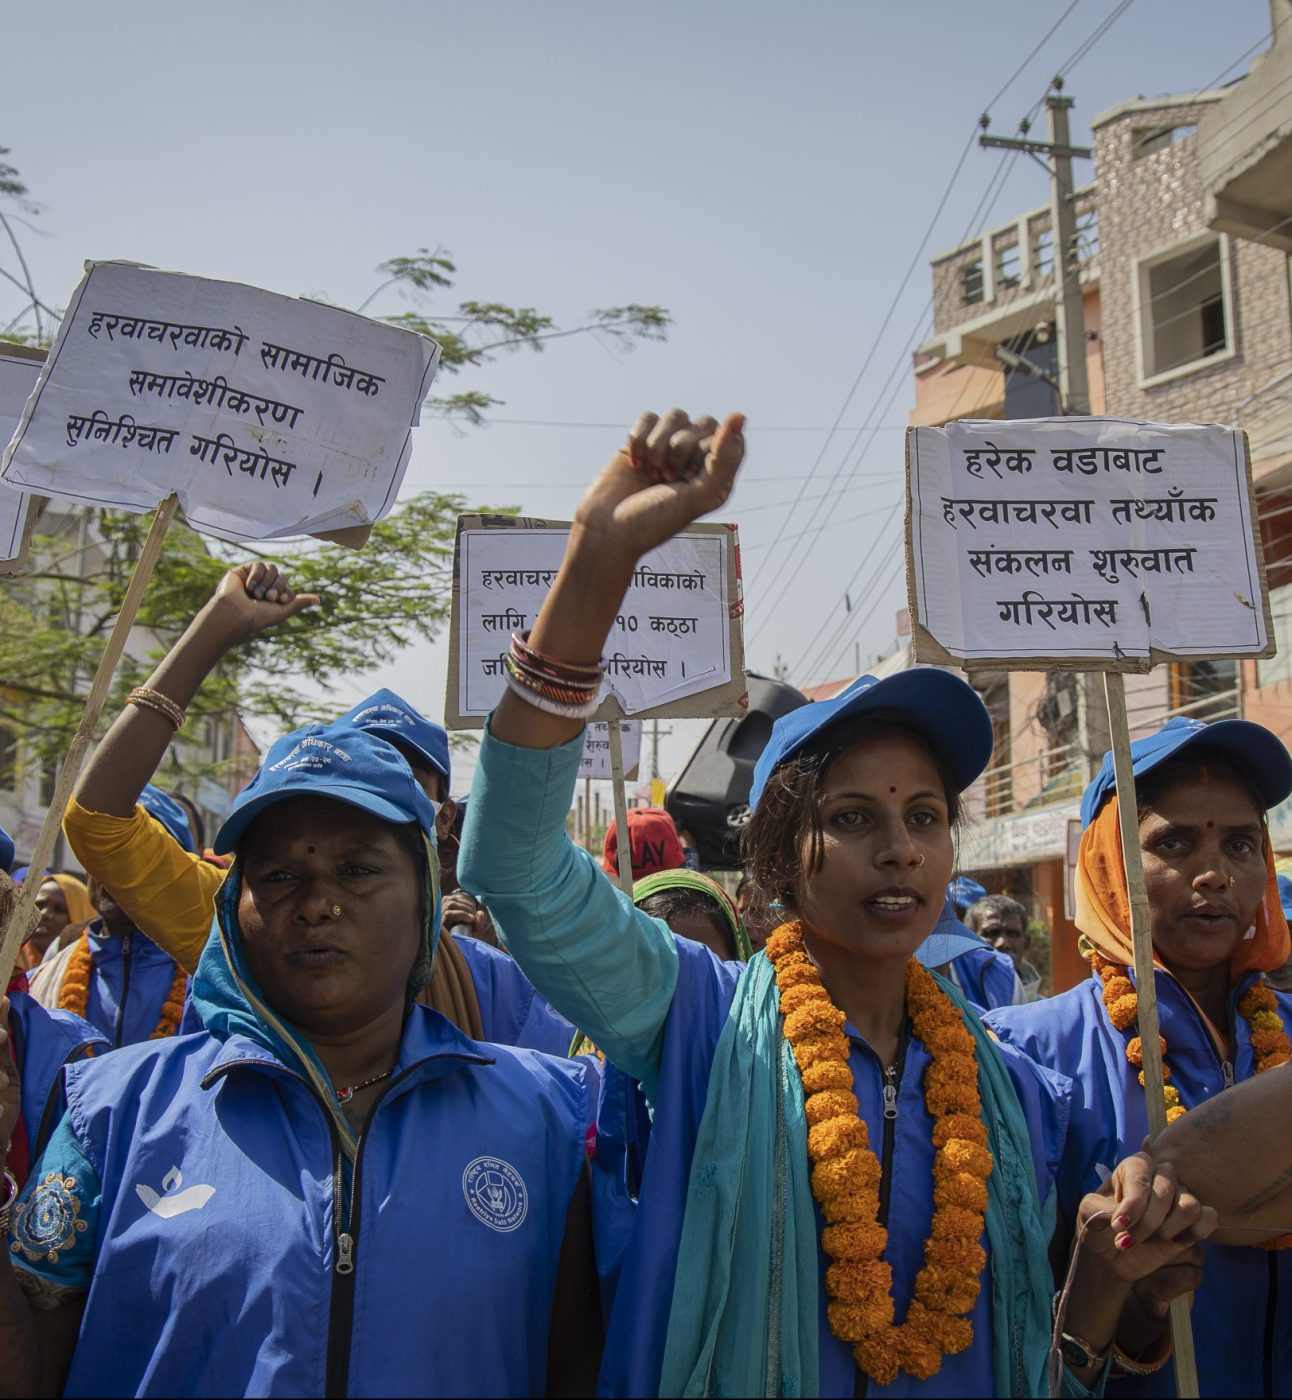 Activists in Nepal at a march.